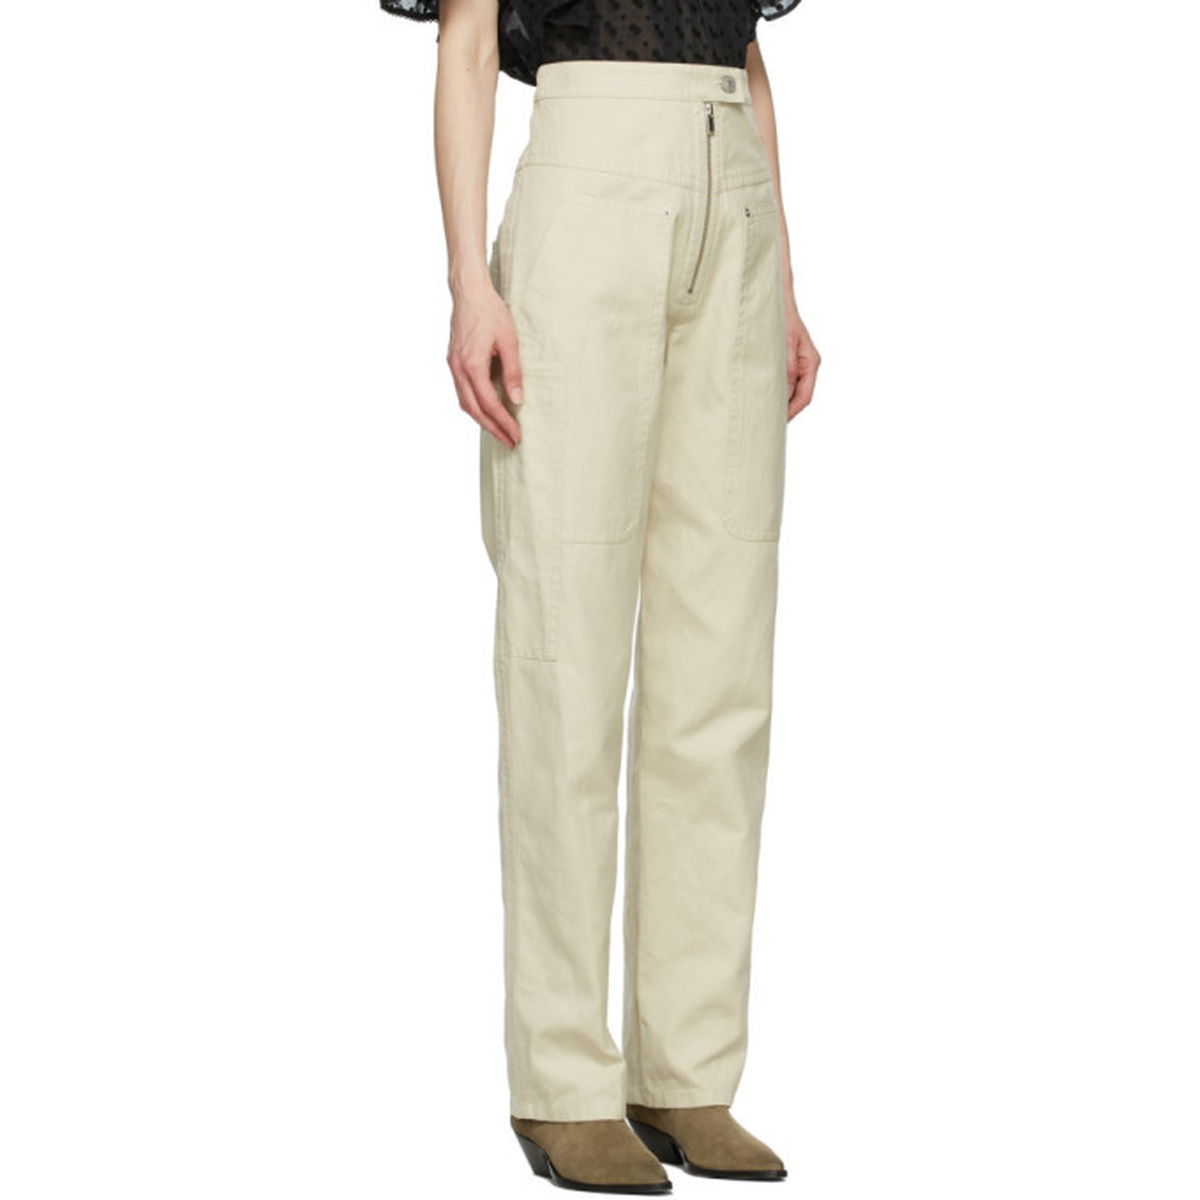 Isabel Marant Etoile Off-White Phil Trousers Isabel Marant Etoile